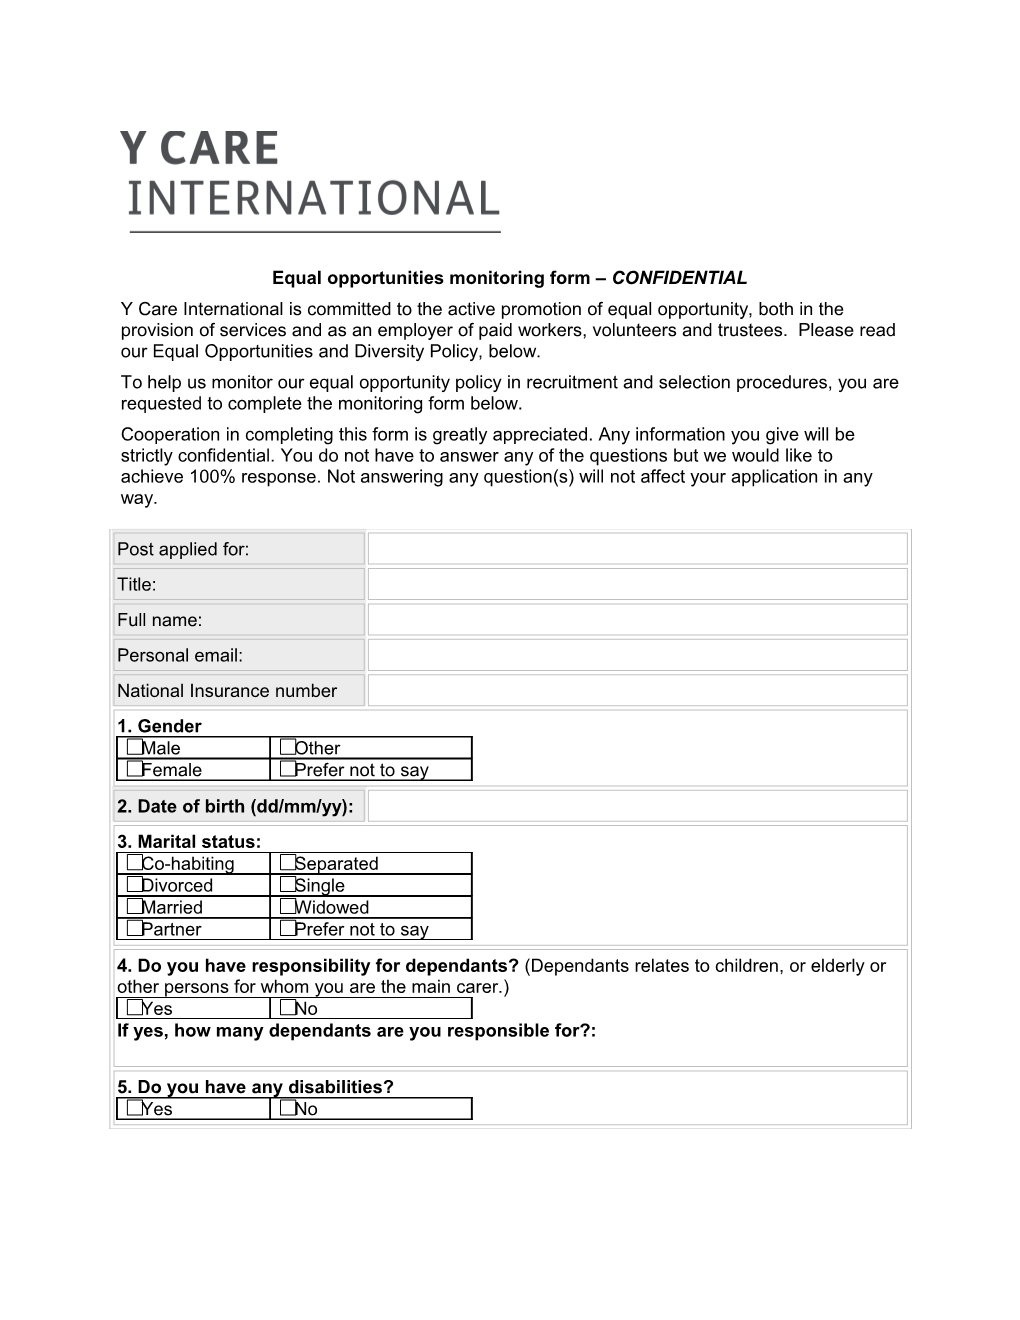 Equal Opportunities Monitoring Form CONFIDENTIAL